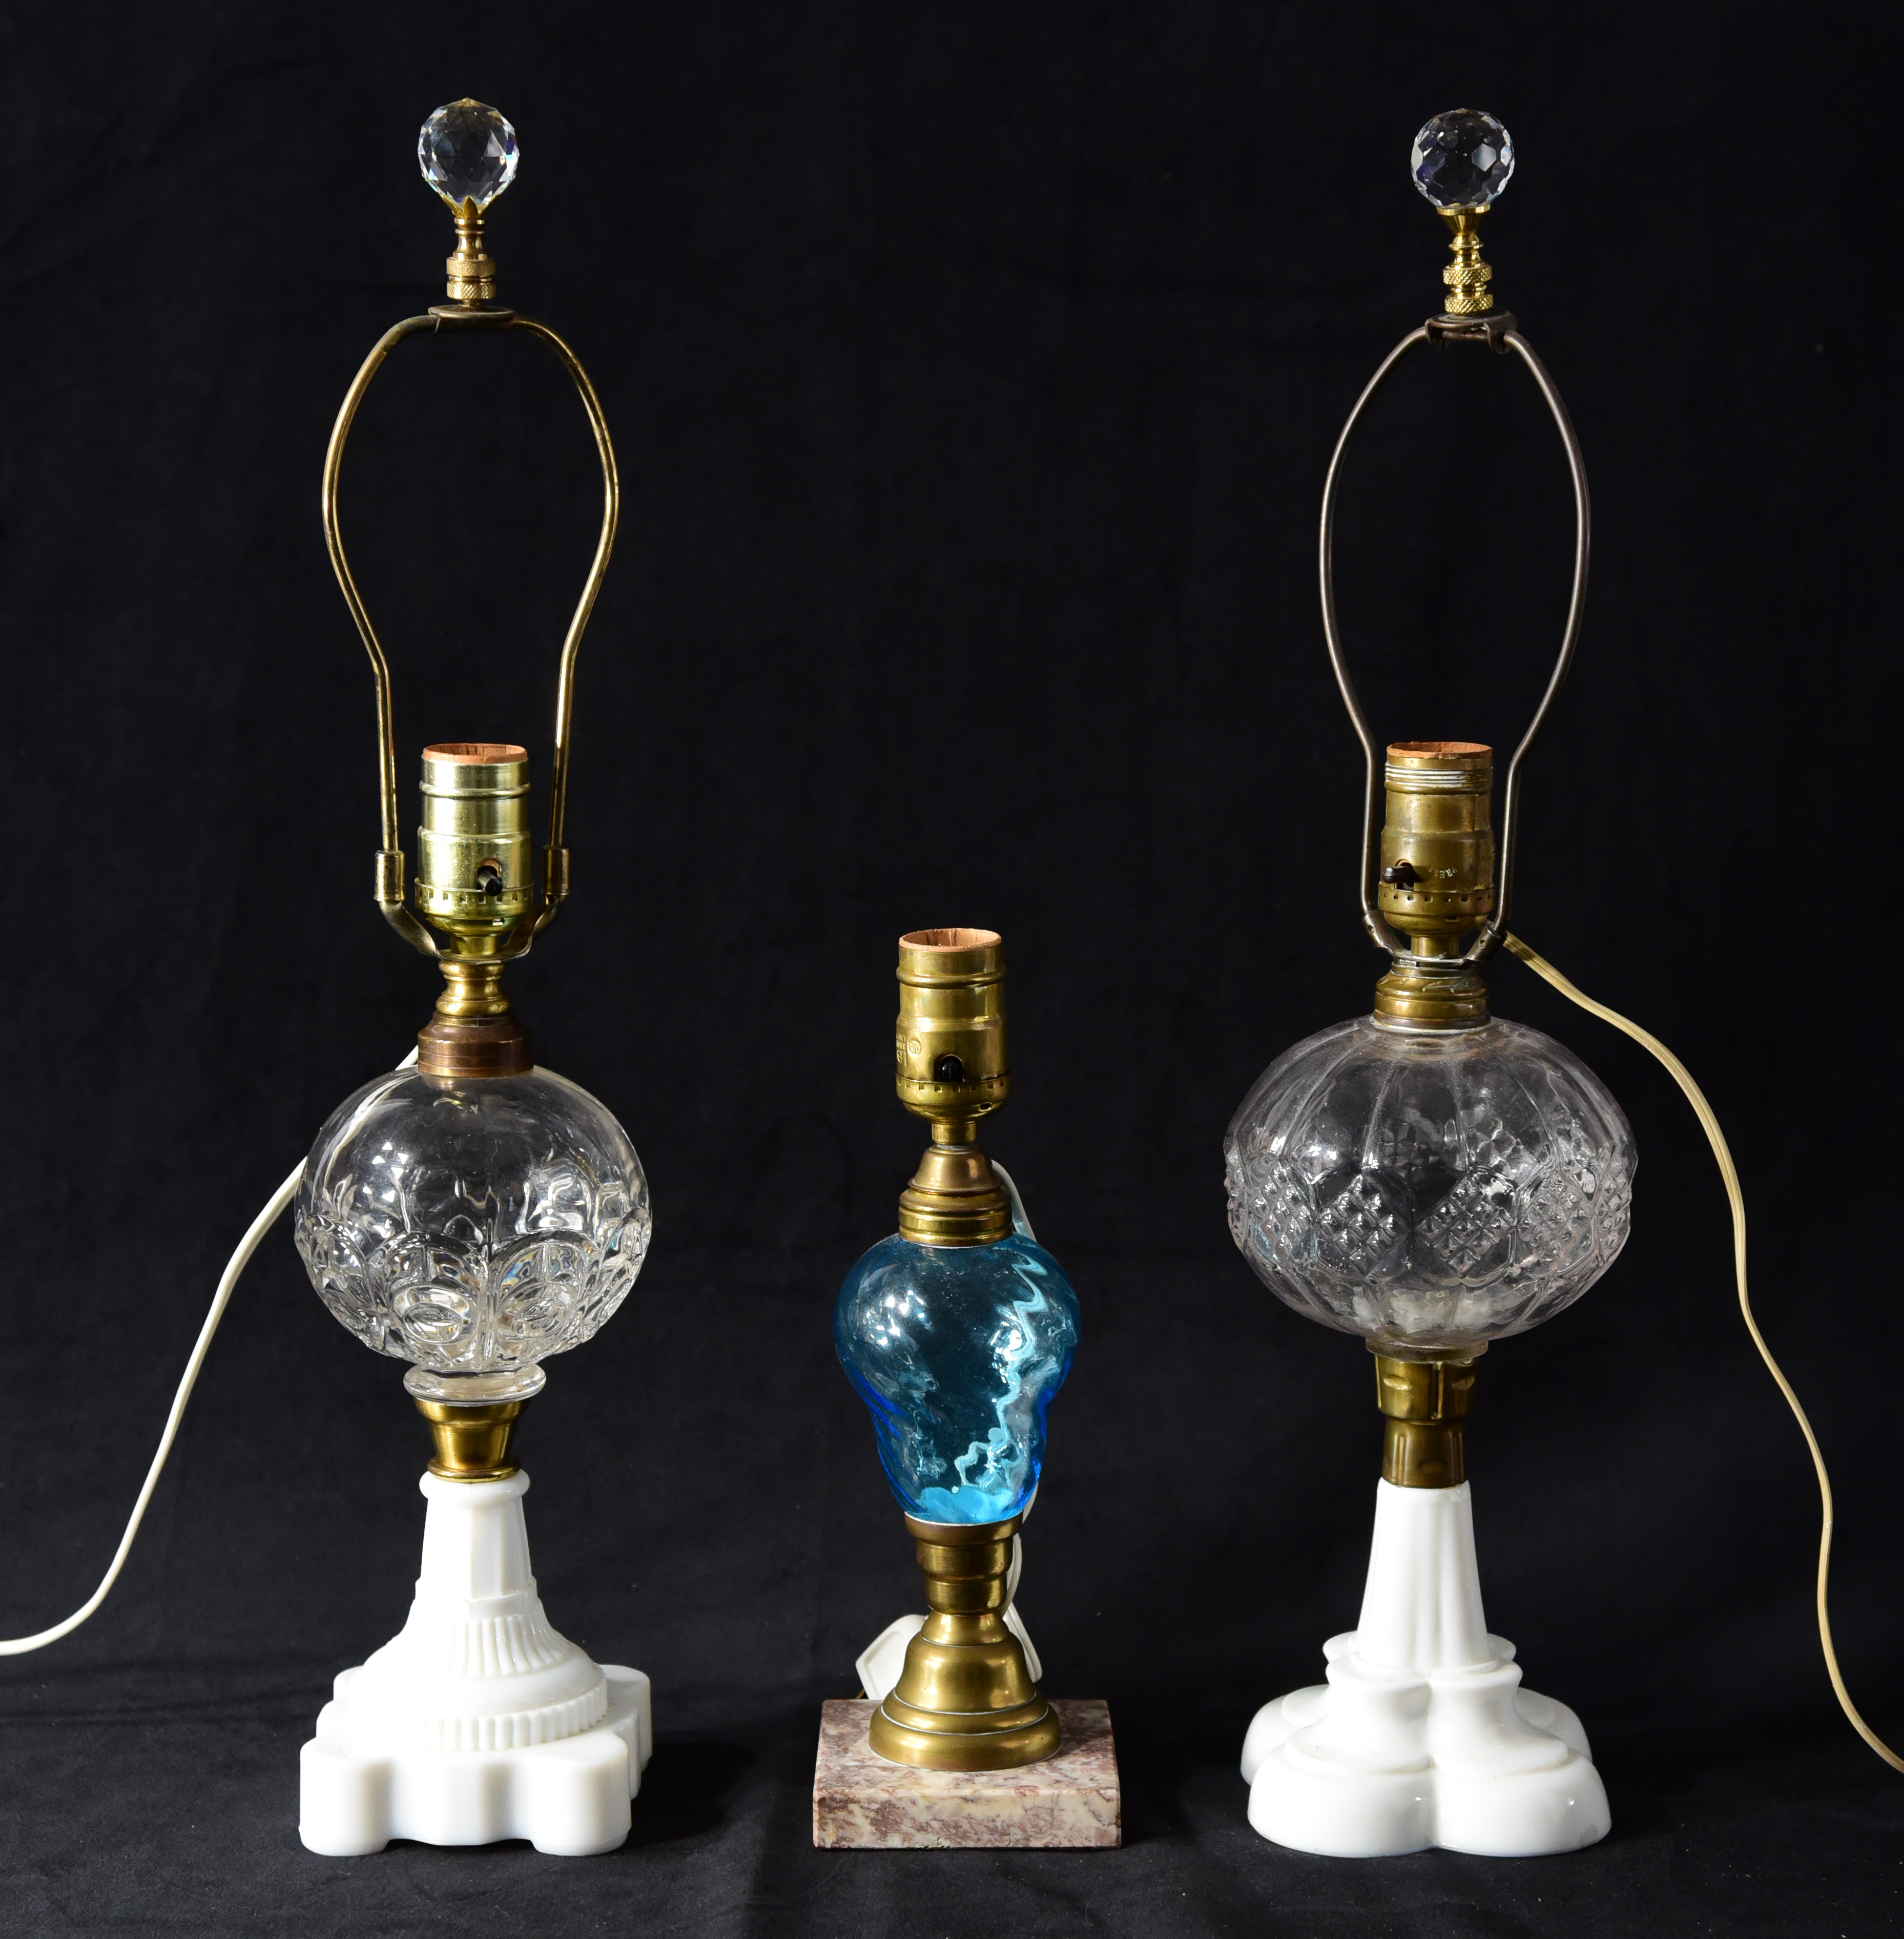  3 Oil lamps converted to electric  3b12a7